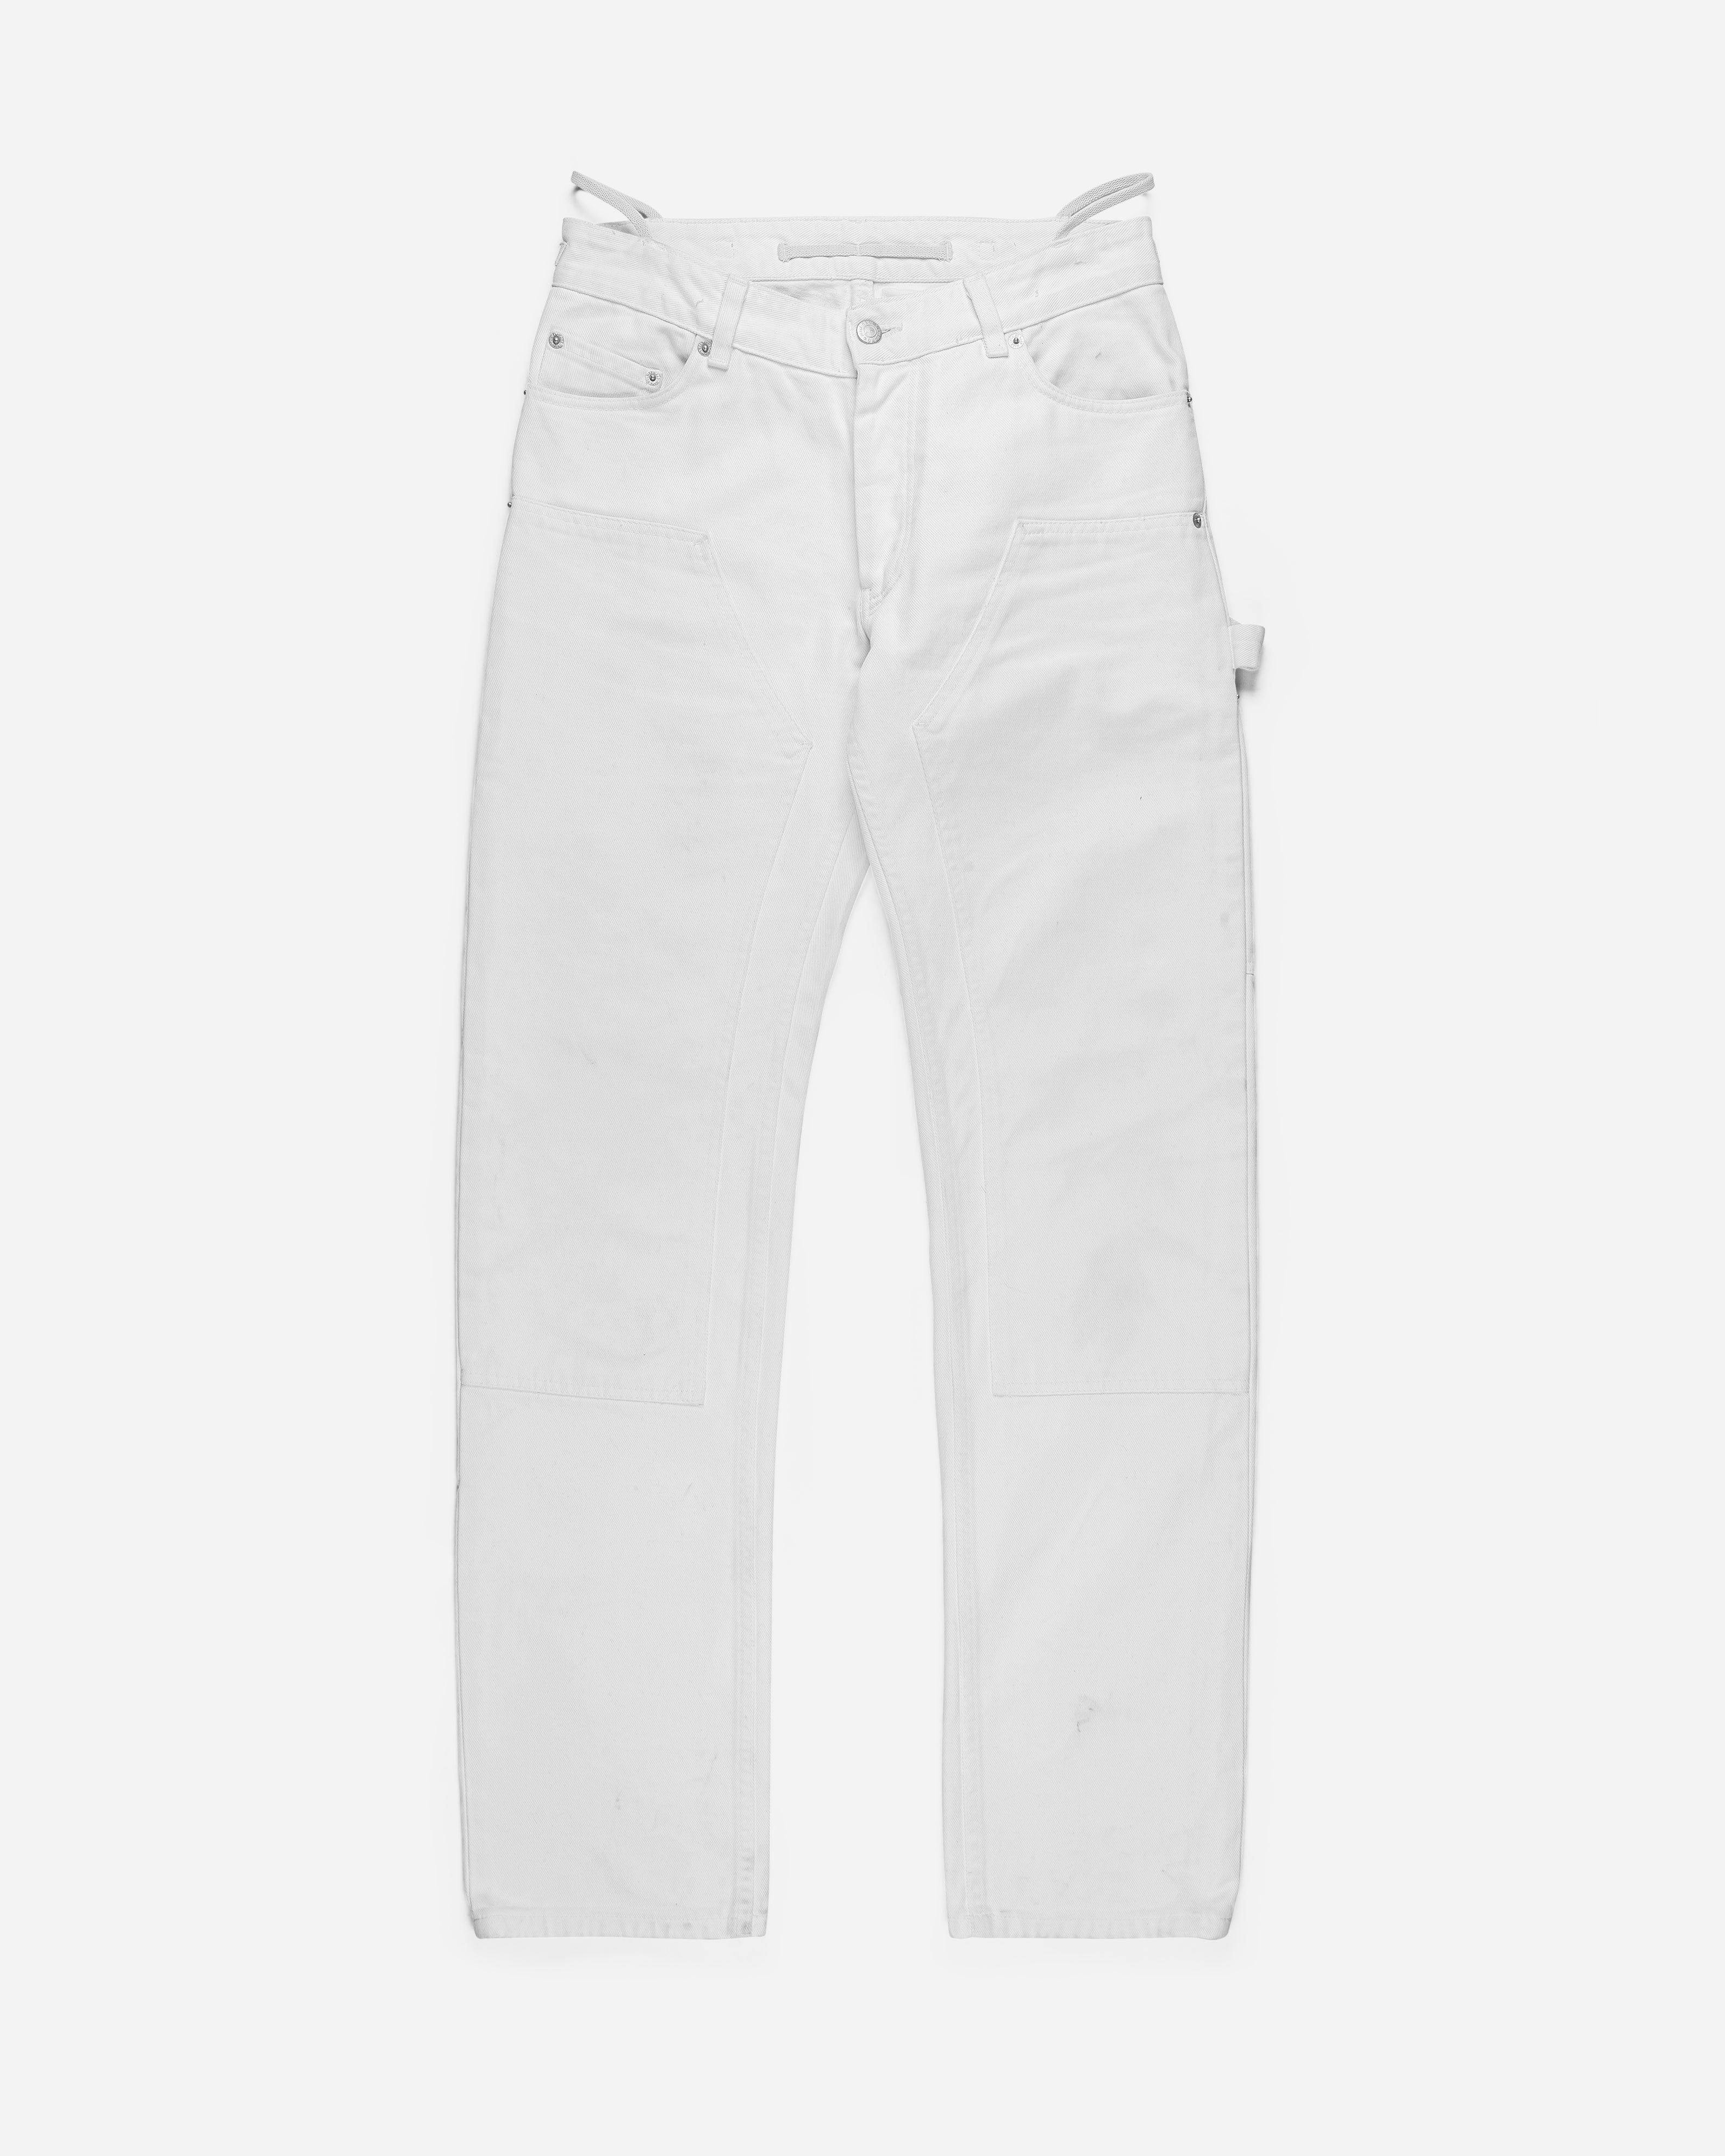 Helmut Lang White Double Knee Work Pants - SS98 - SILVER